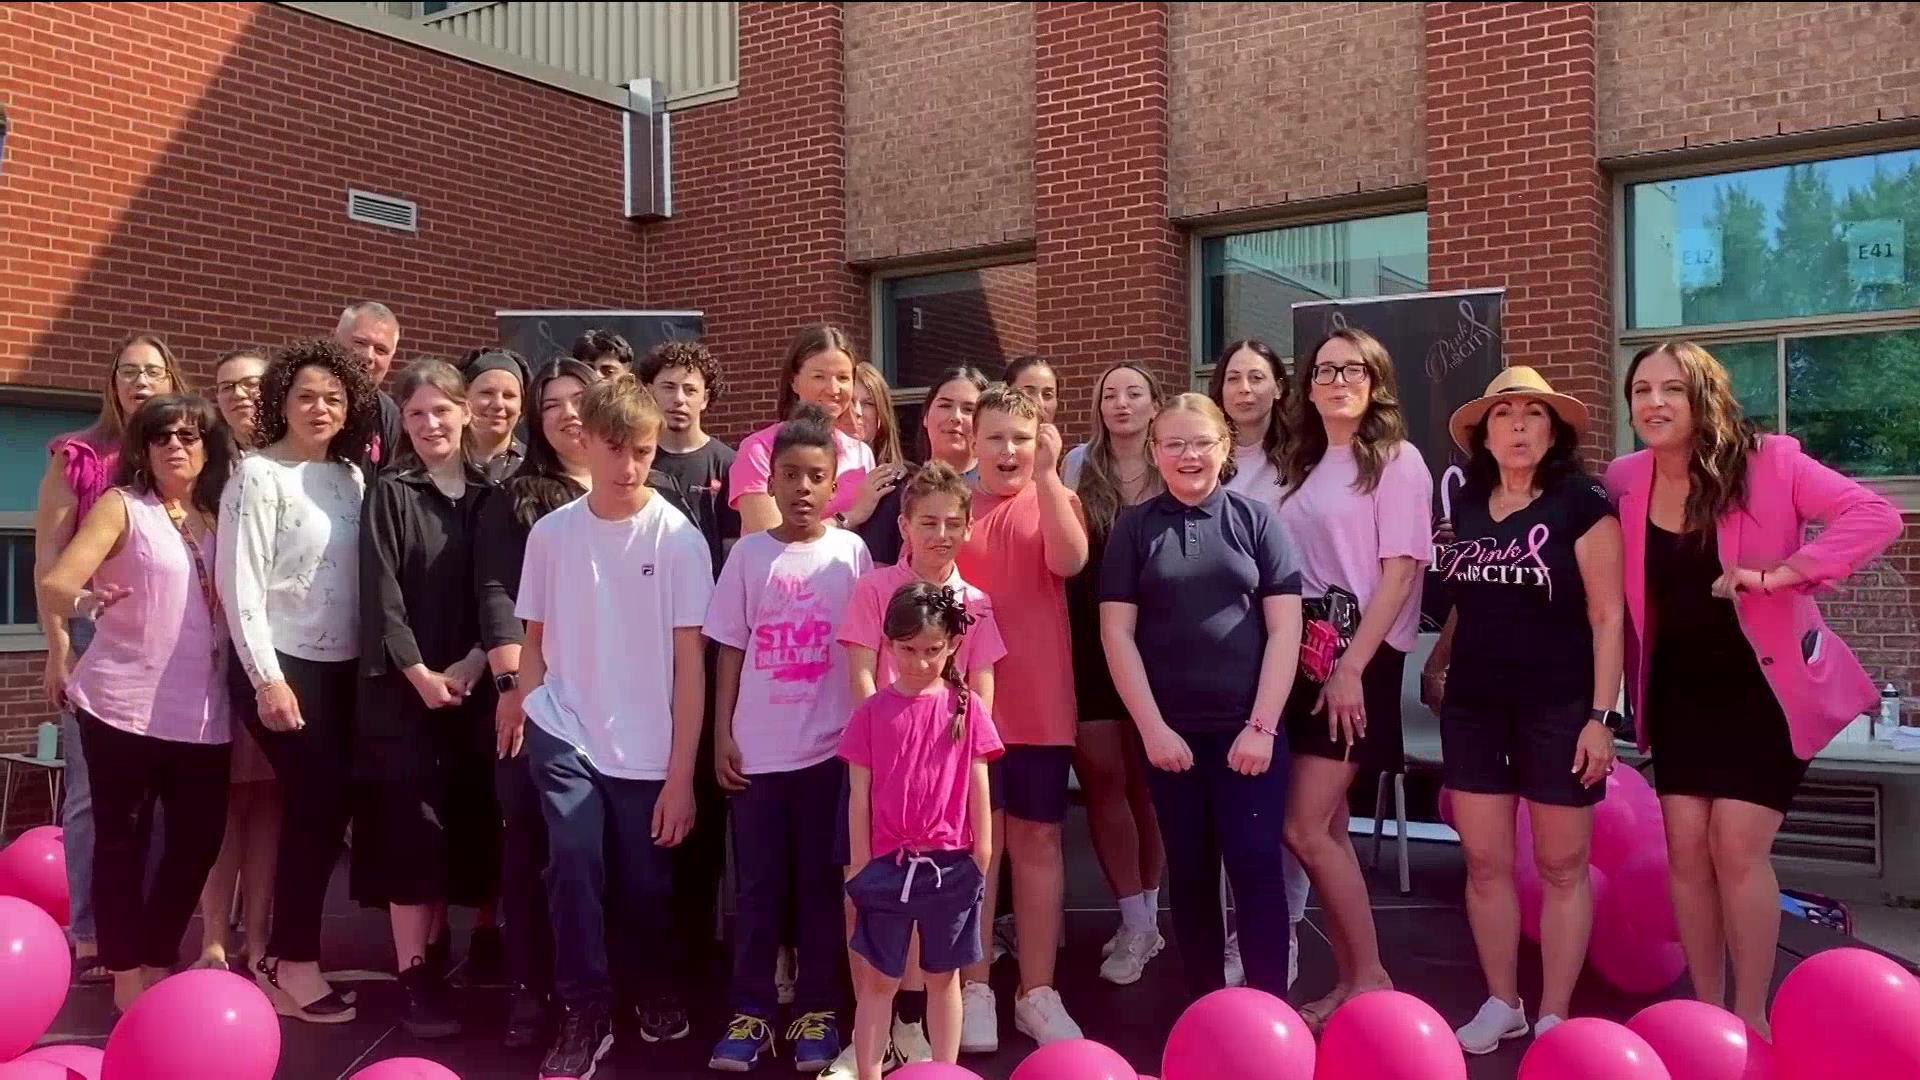 Laval students showing solidarity with those affected by breast cancer